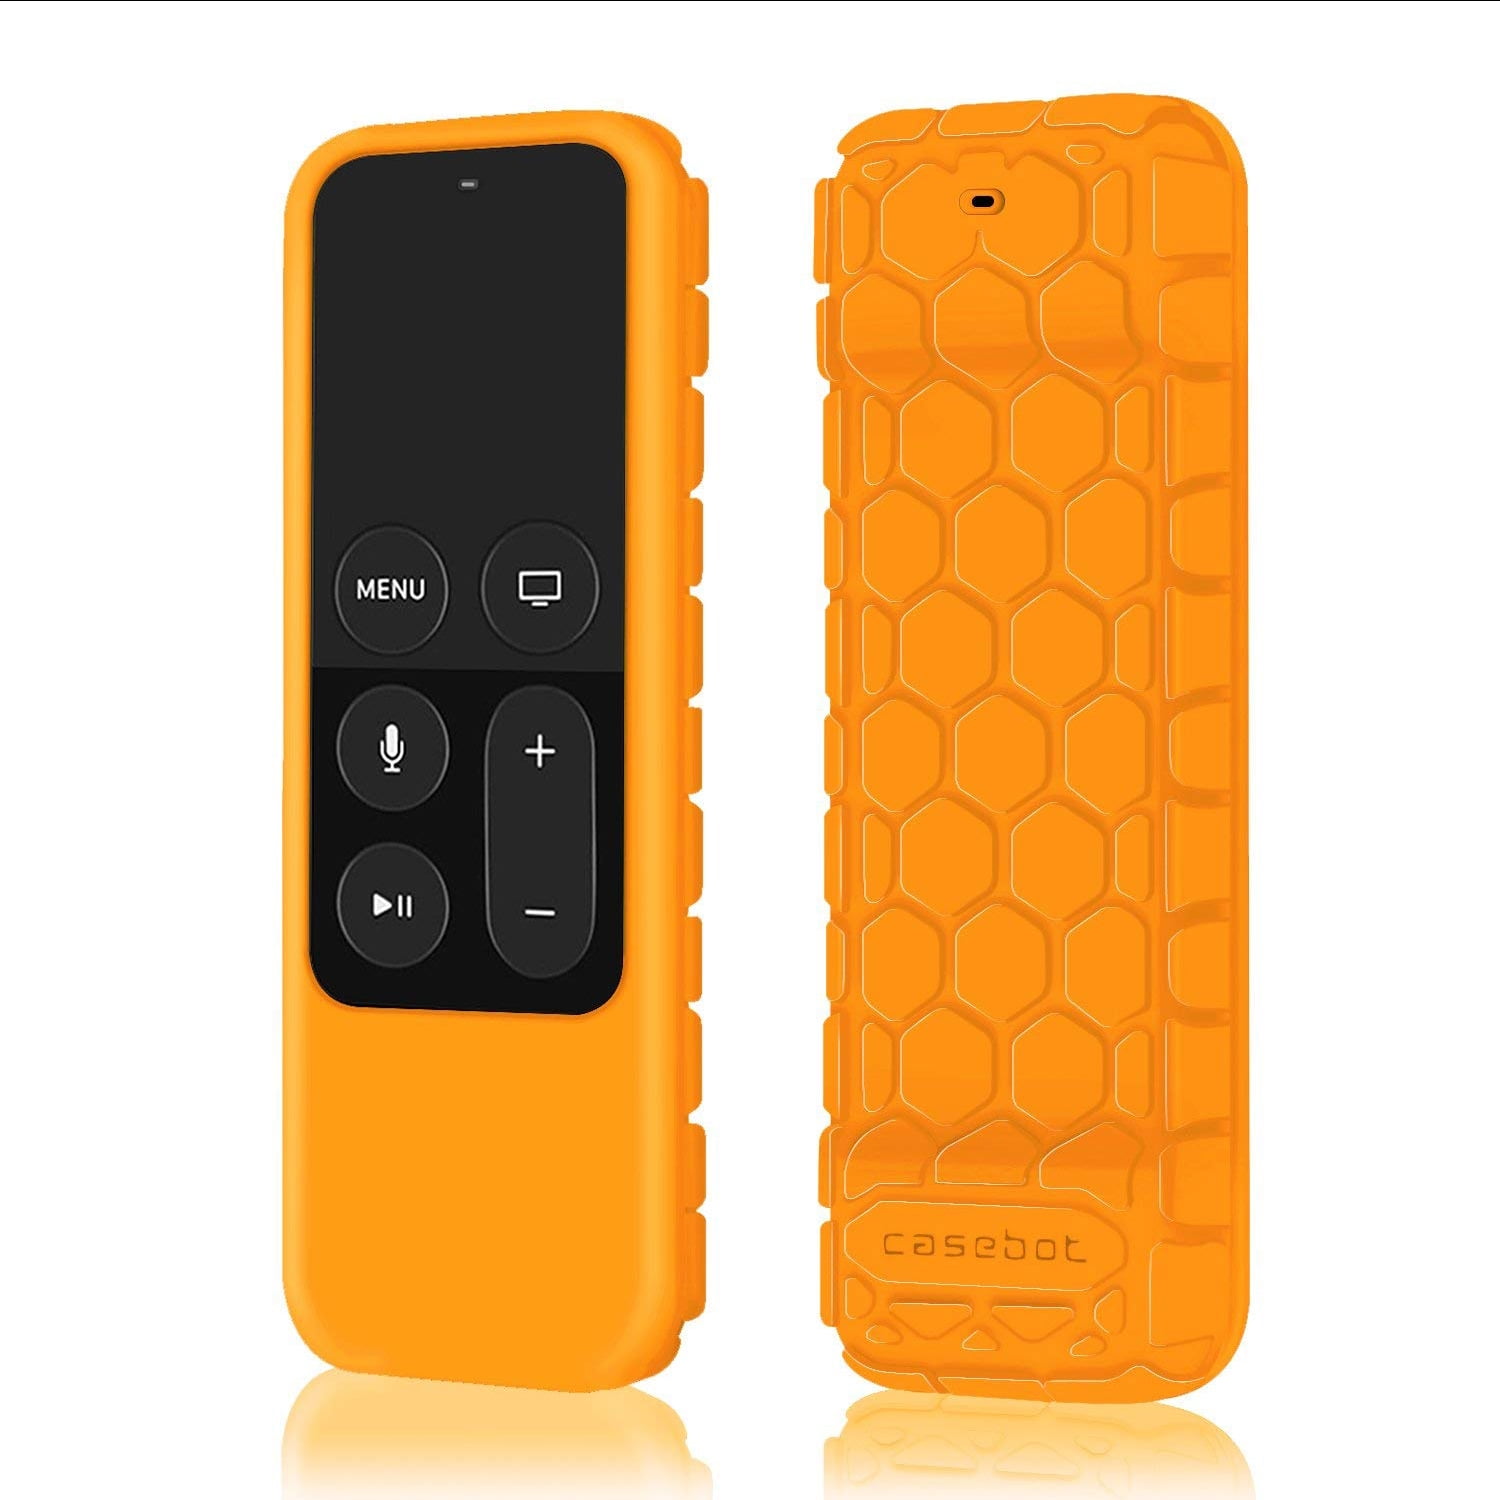 Anti Slip Shock Proof Silicone Cover for Apple TV Siri Remote Controller Black Lightweight Honey Comb Series 4th Gen Remote Casebot Fintie Protective Case for Apple TV 4K 5th 